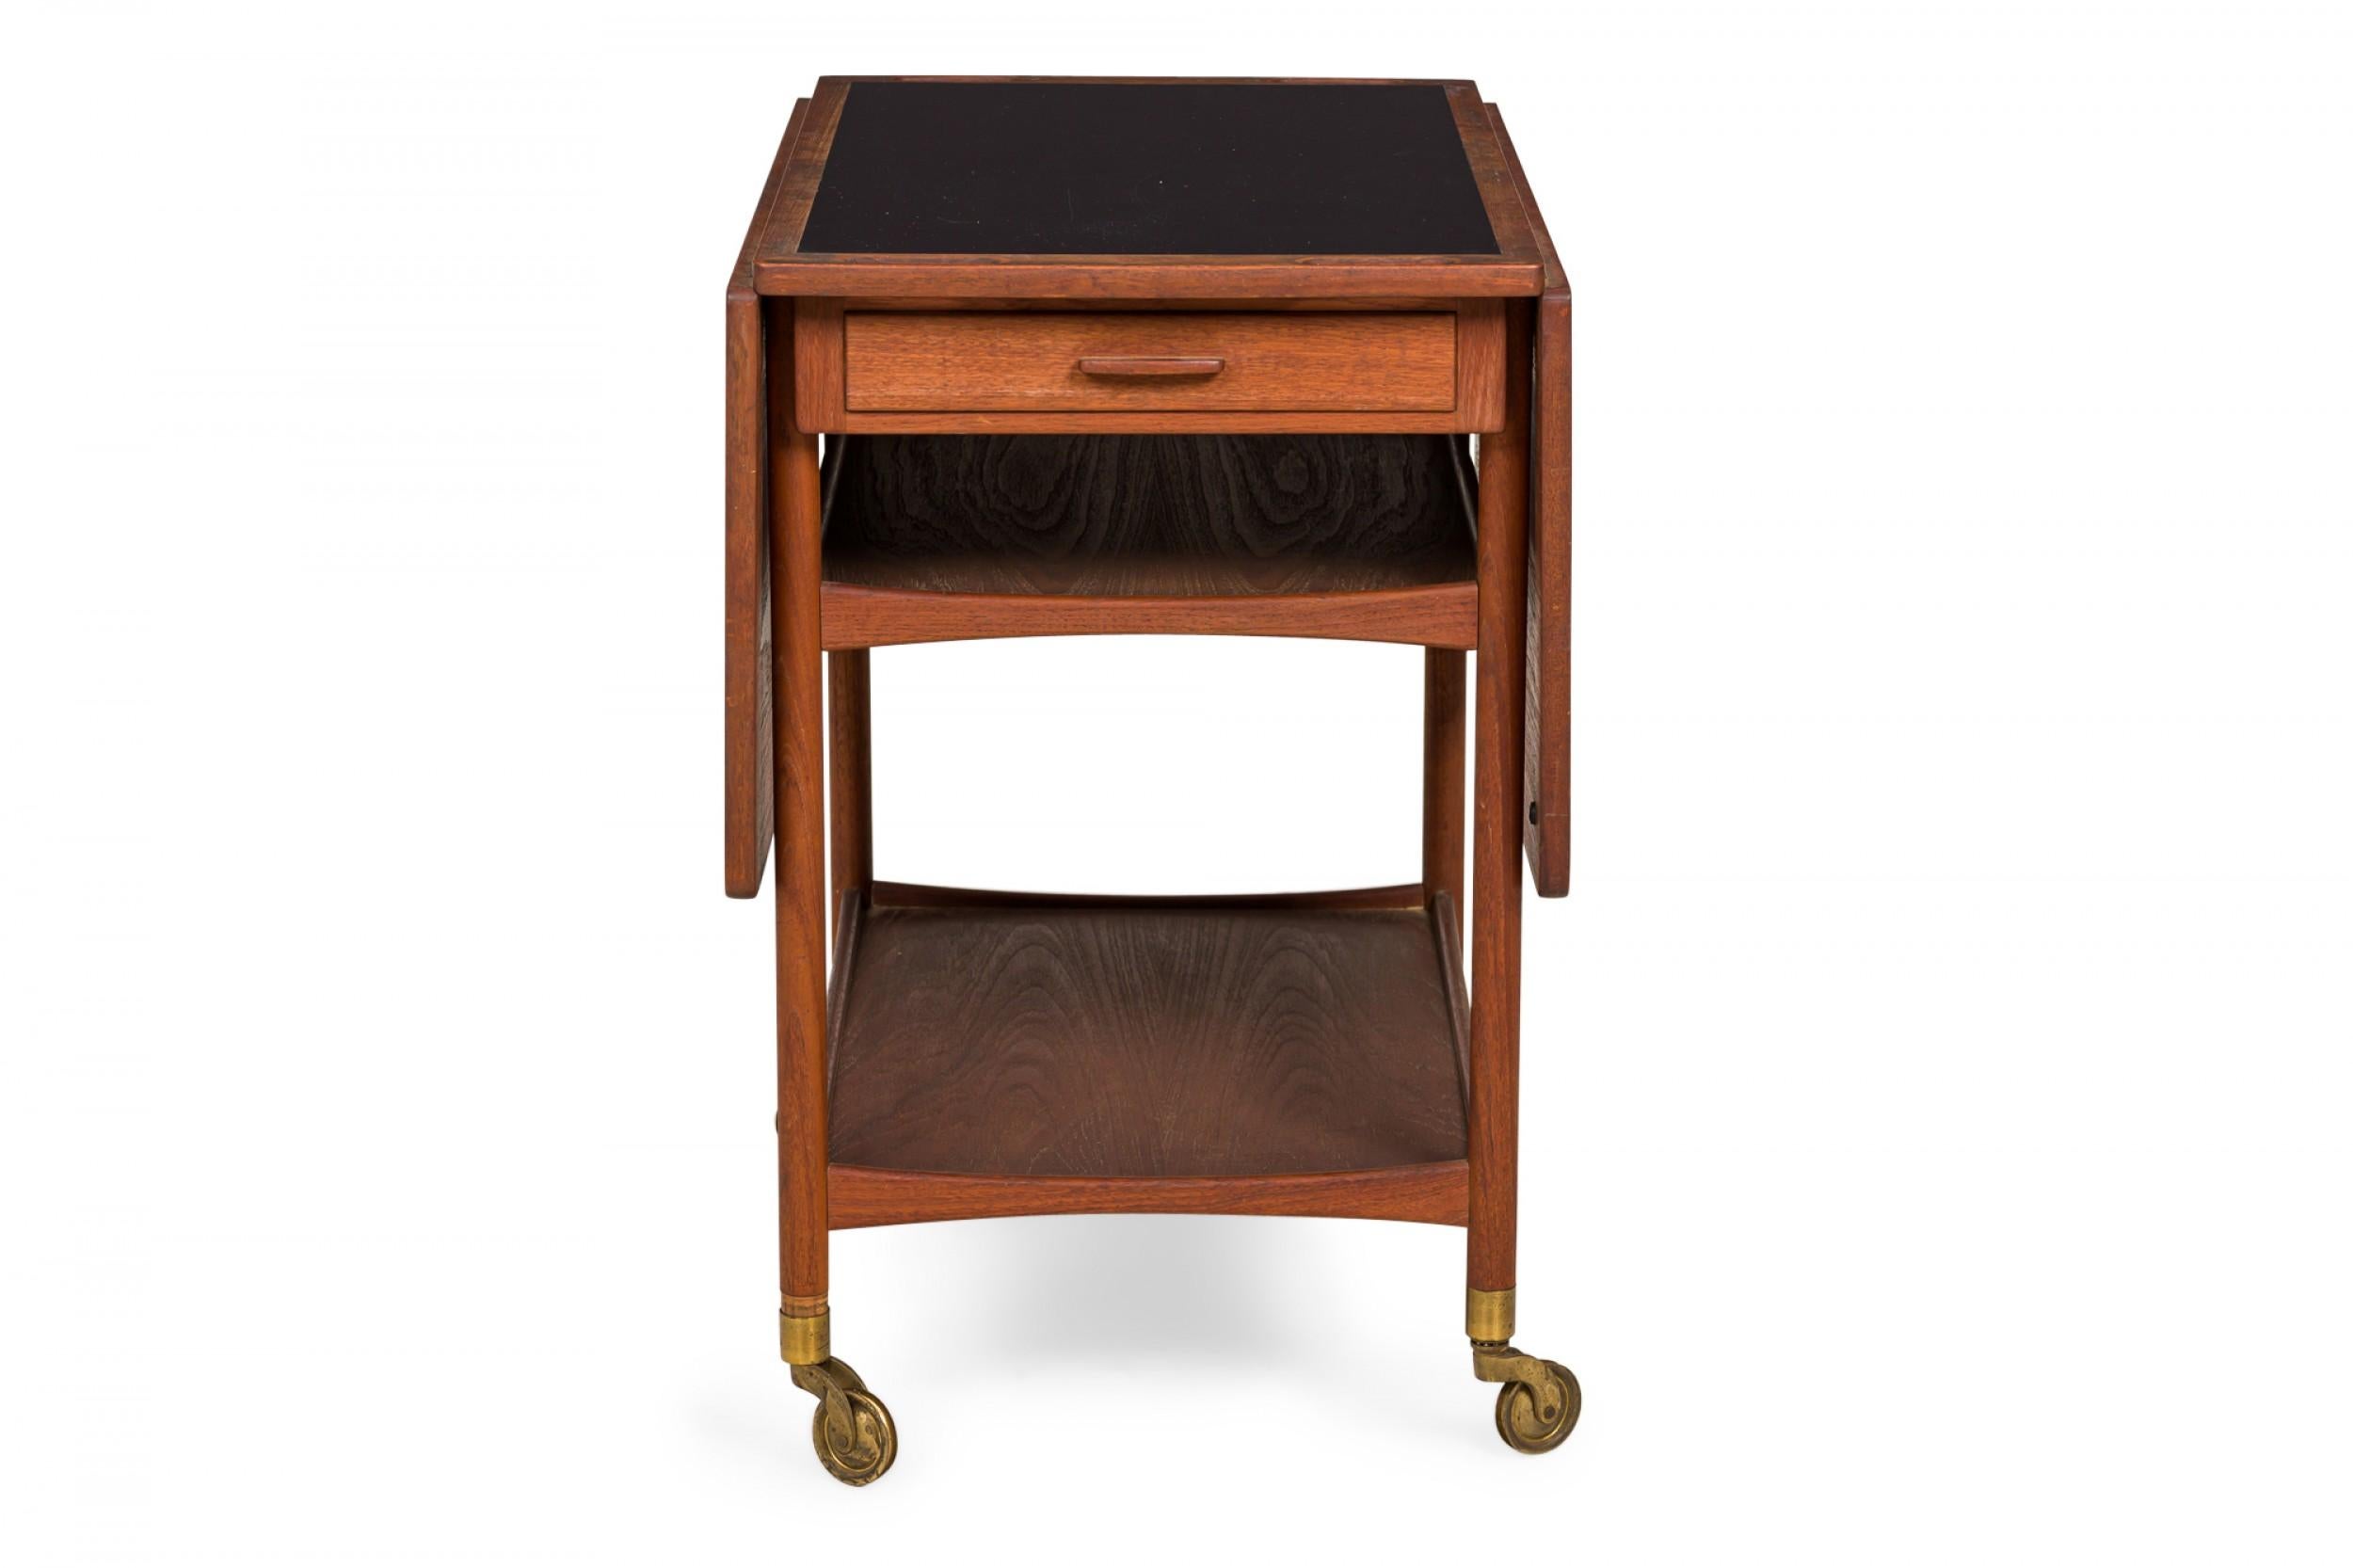 Danish Mid-Century rectangular two-tier serving trolley with a teak frame, an inset black laminate top, and two teak drop leaves, resting on four casters. (LUDVIG PONTOPPIDAN)(Similar piece: DUF0230)
